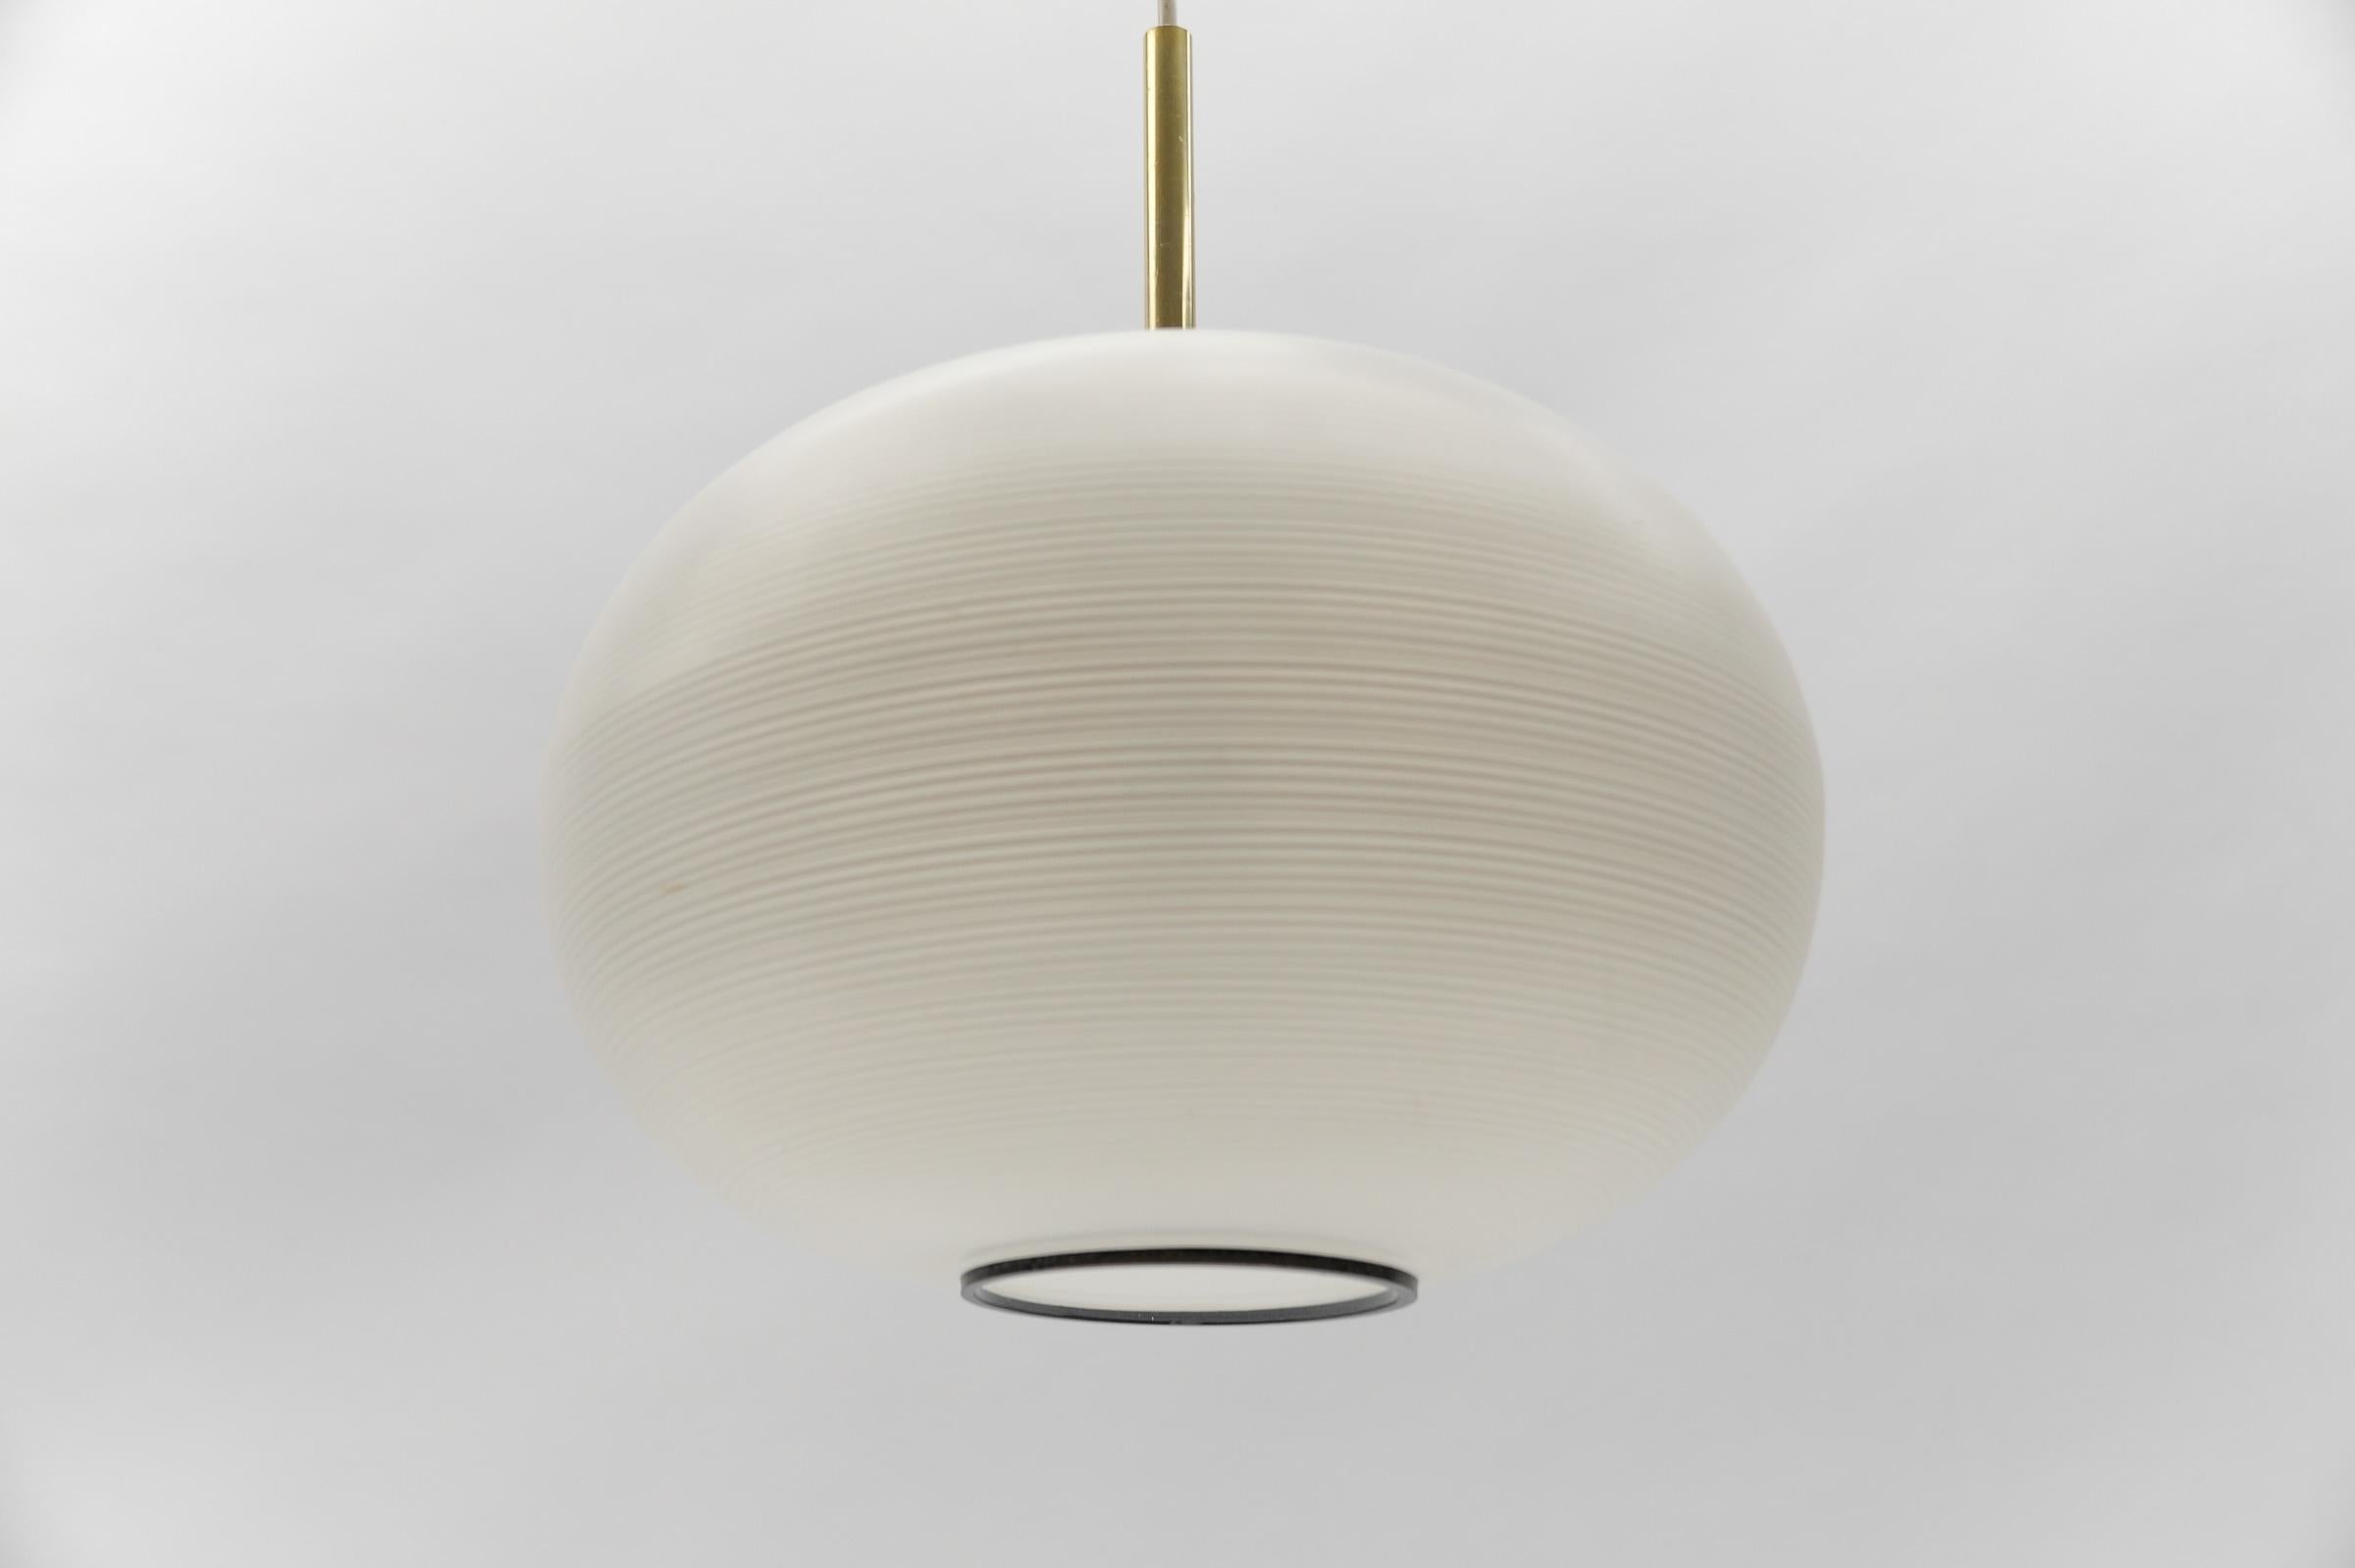 Mid Century Modern Opaline Glass Ball Pendant Lamp by Doria, 1960s Germany For Sale 2